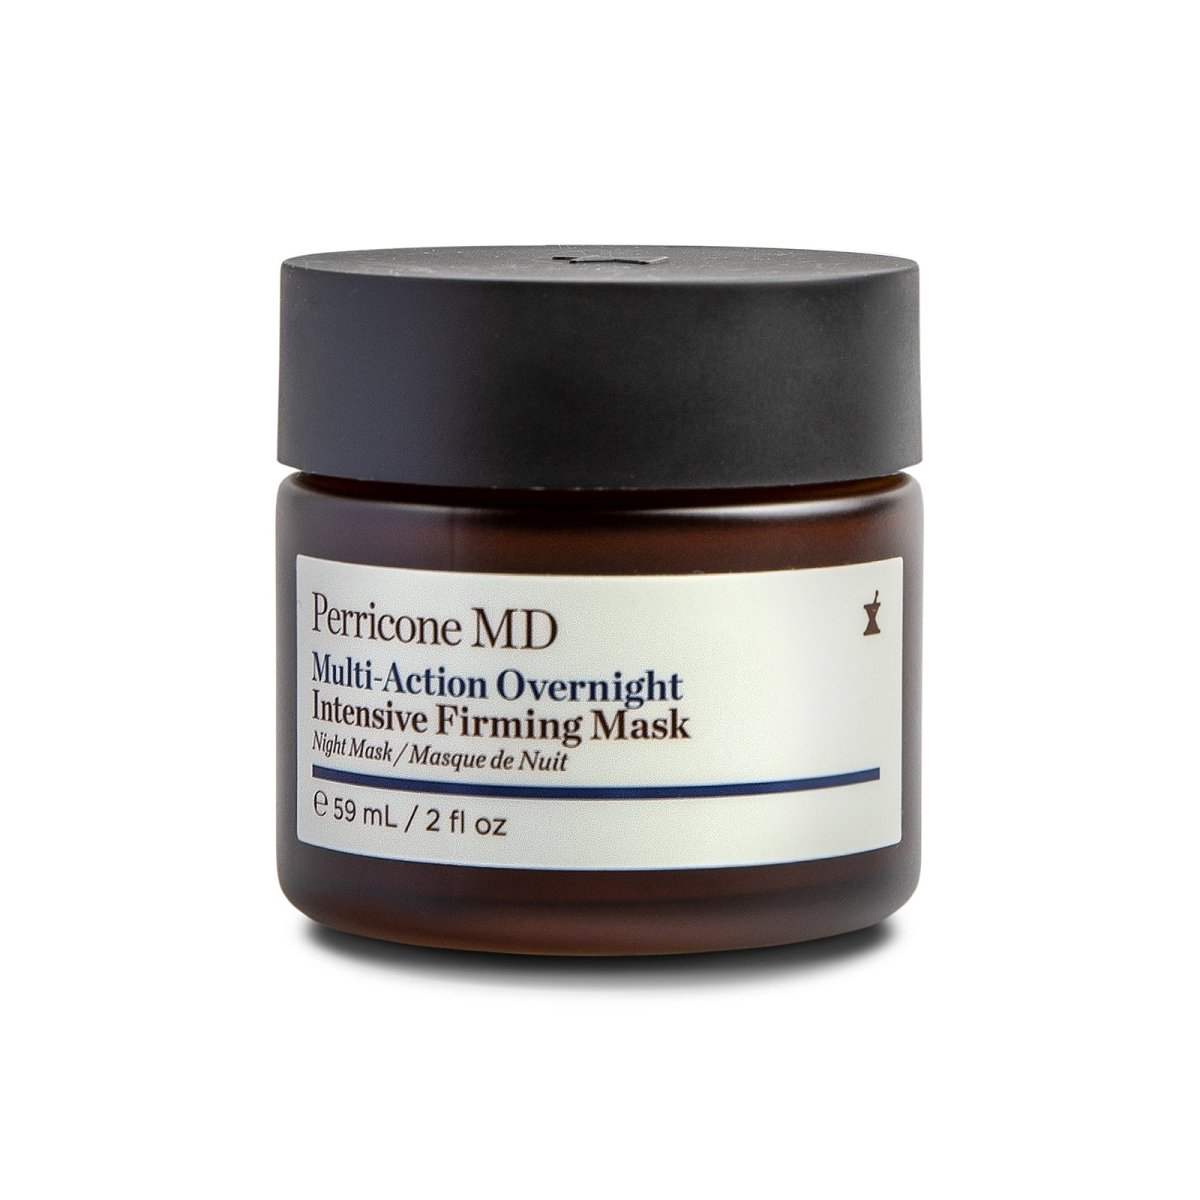 Perricone MD Multi-Action Overnight Intensive Firming Mask - SkincareEssentials